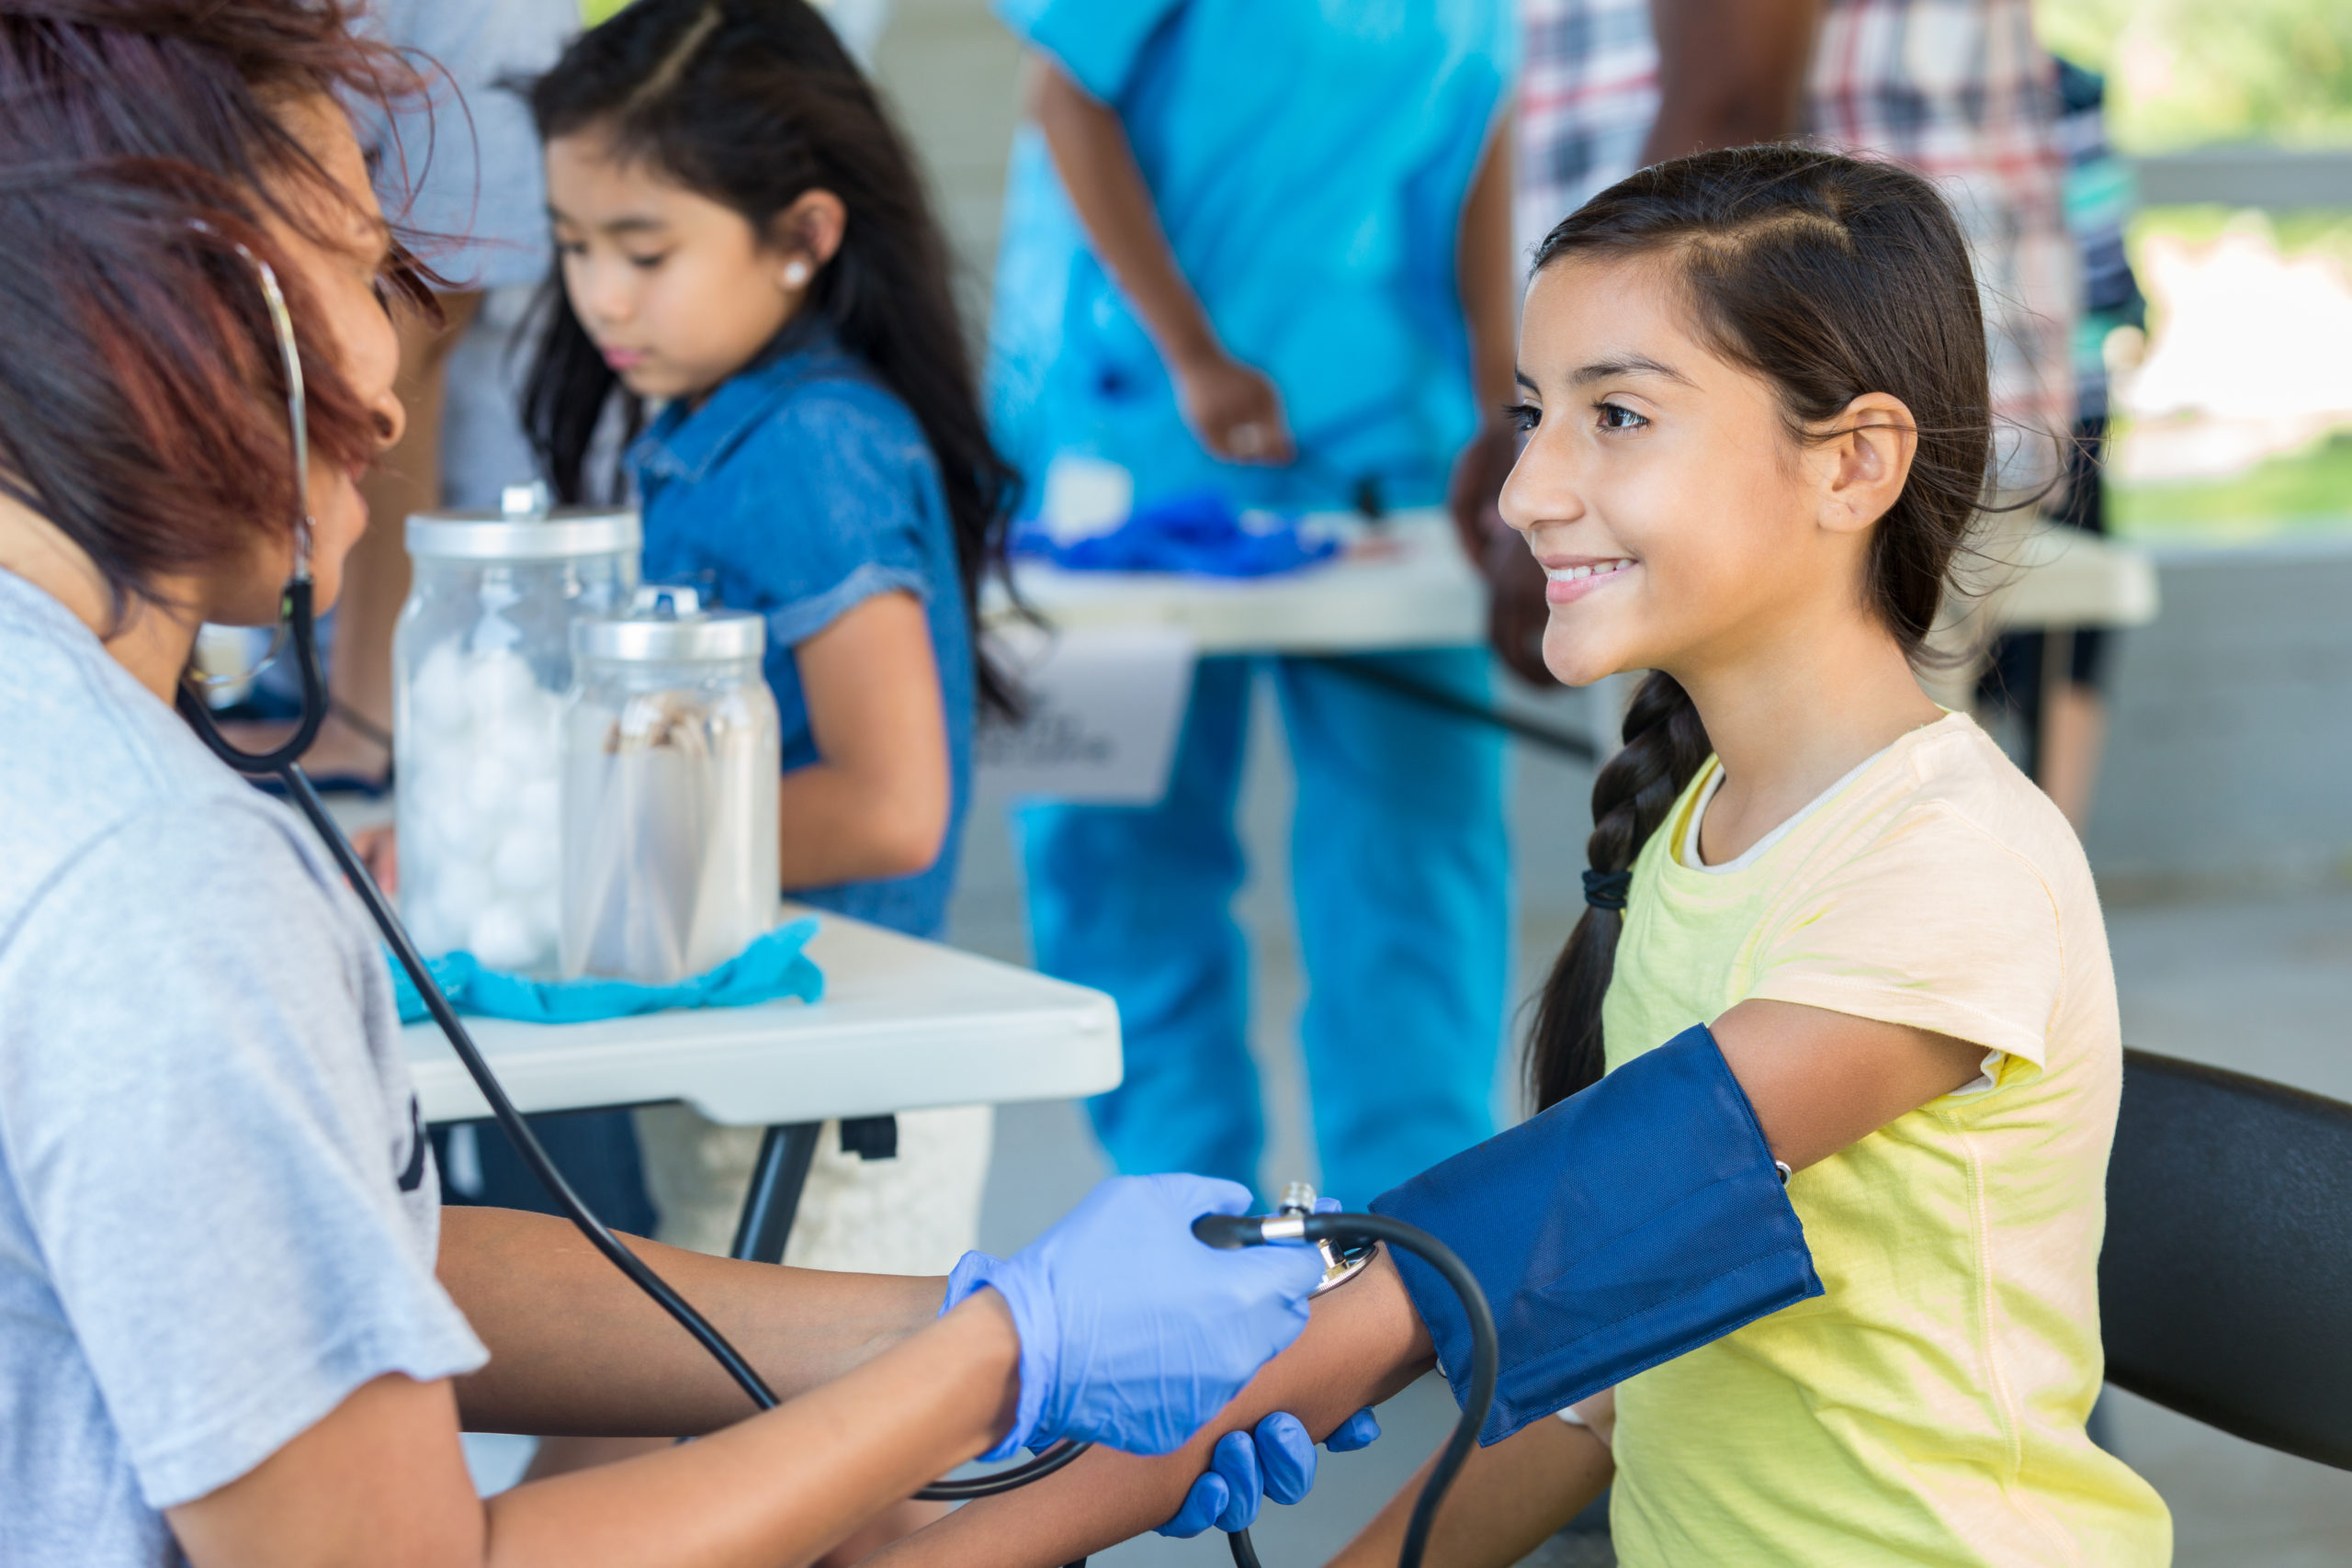 Cheerful preteen Hispanic girl having her blood pressure checked by a female African American mid adult volunteer nurse at an outdoor health fair. Smiling Hispanic young girl at a medical expo getting her blood pressure checked by African American volunteer nurse.